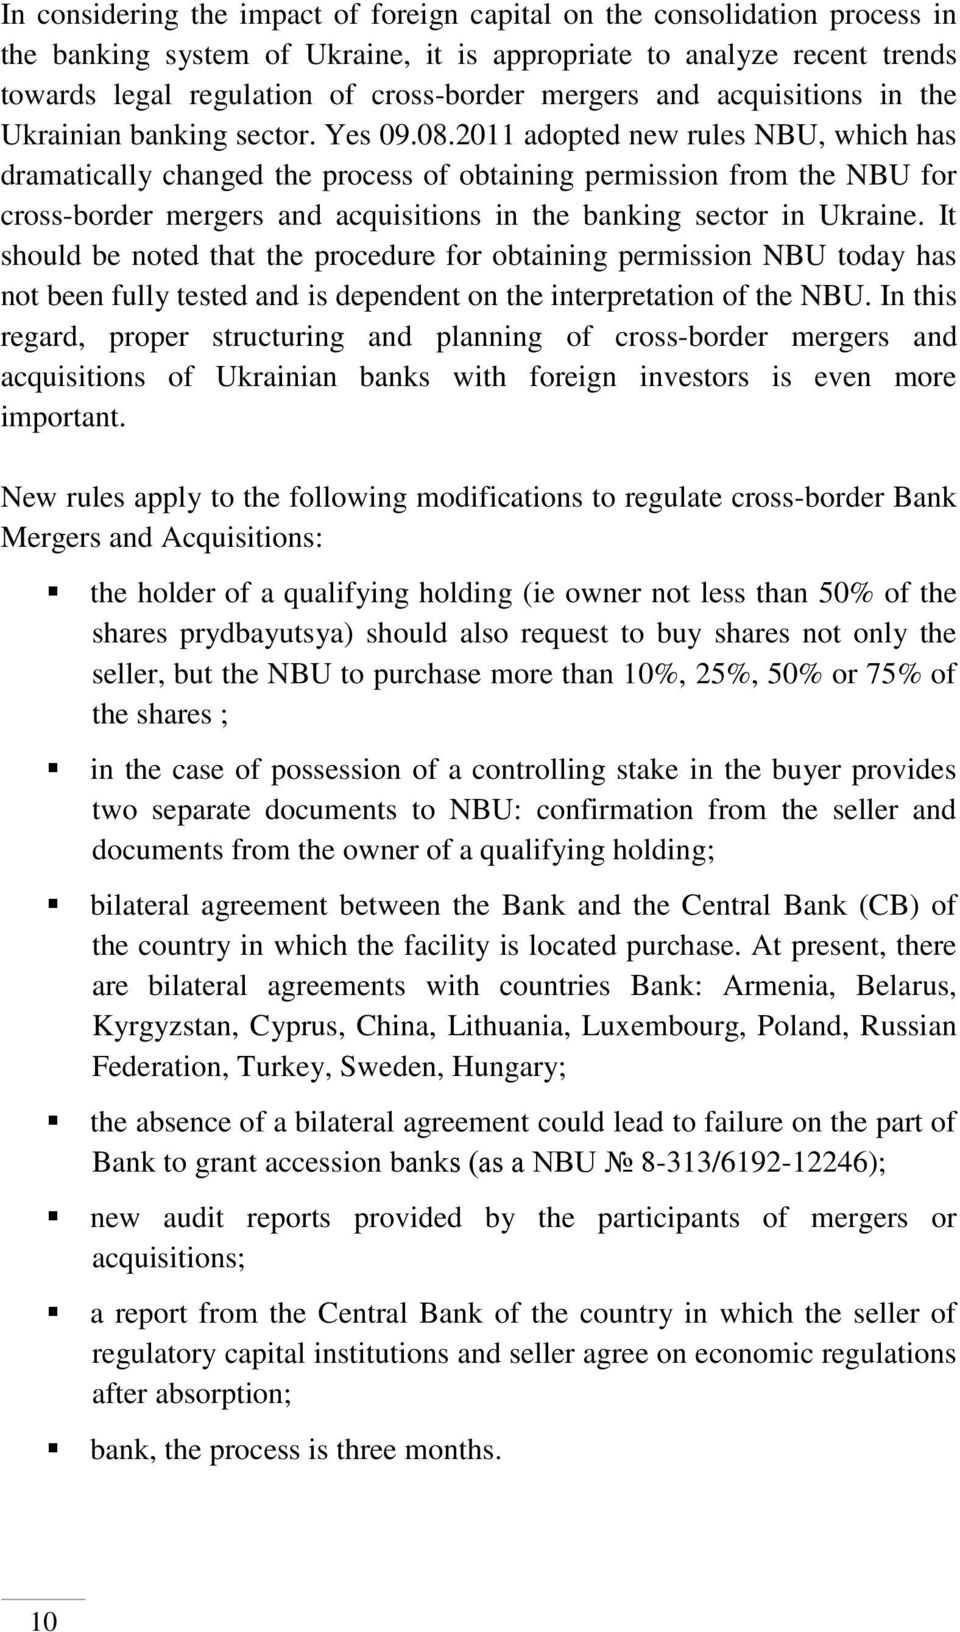 2011 adopted new rules NBU, which has dramatically changed the process of obtaining permission from the NBU for cross-border mergers and acquisitions in the banking sector in Ukraine.